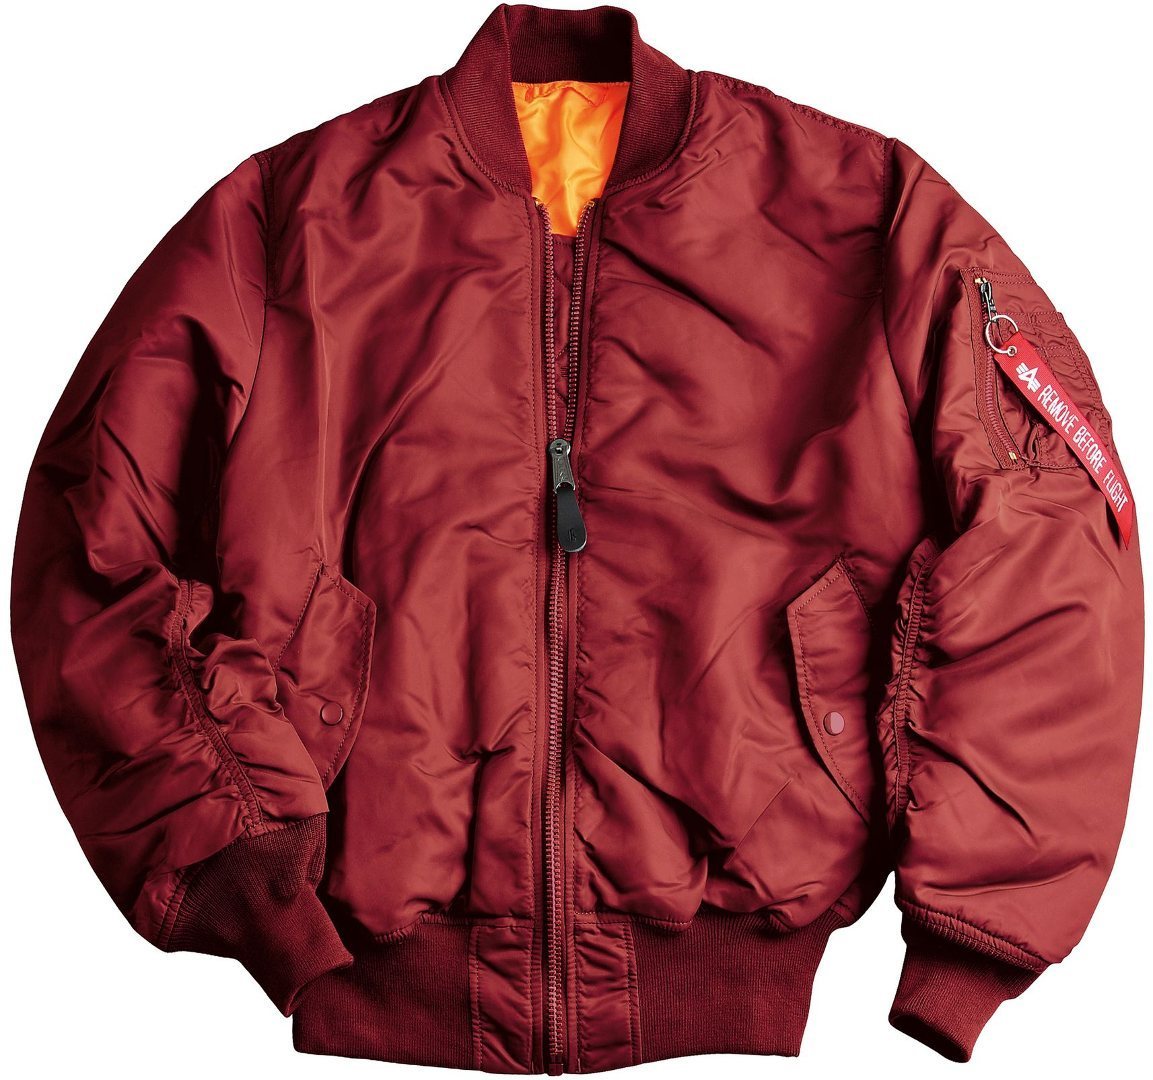 Image of Alpha Industries MA-1 Giacca, rosso, dimensione 3XL